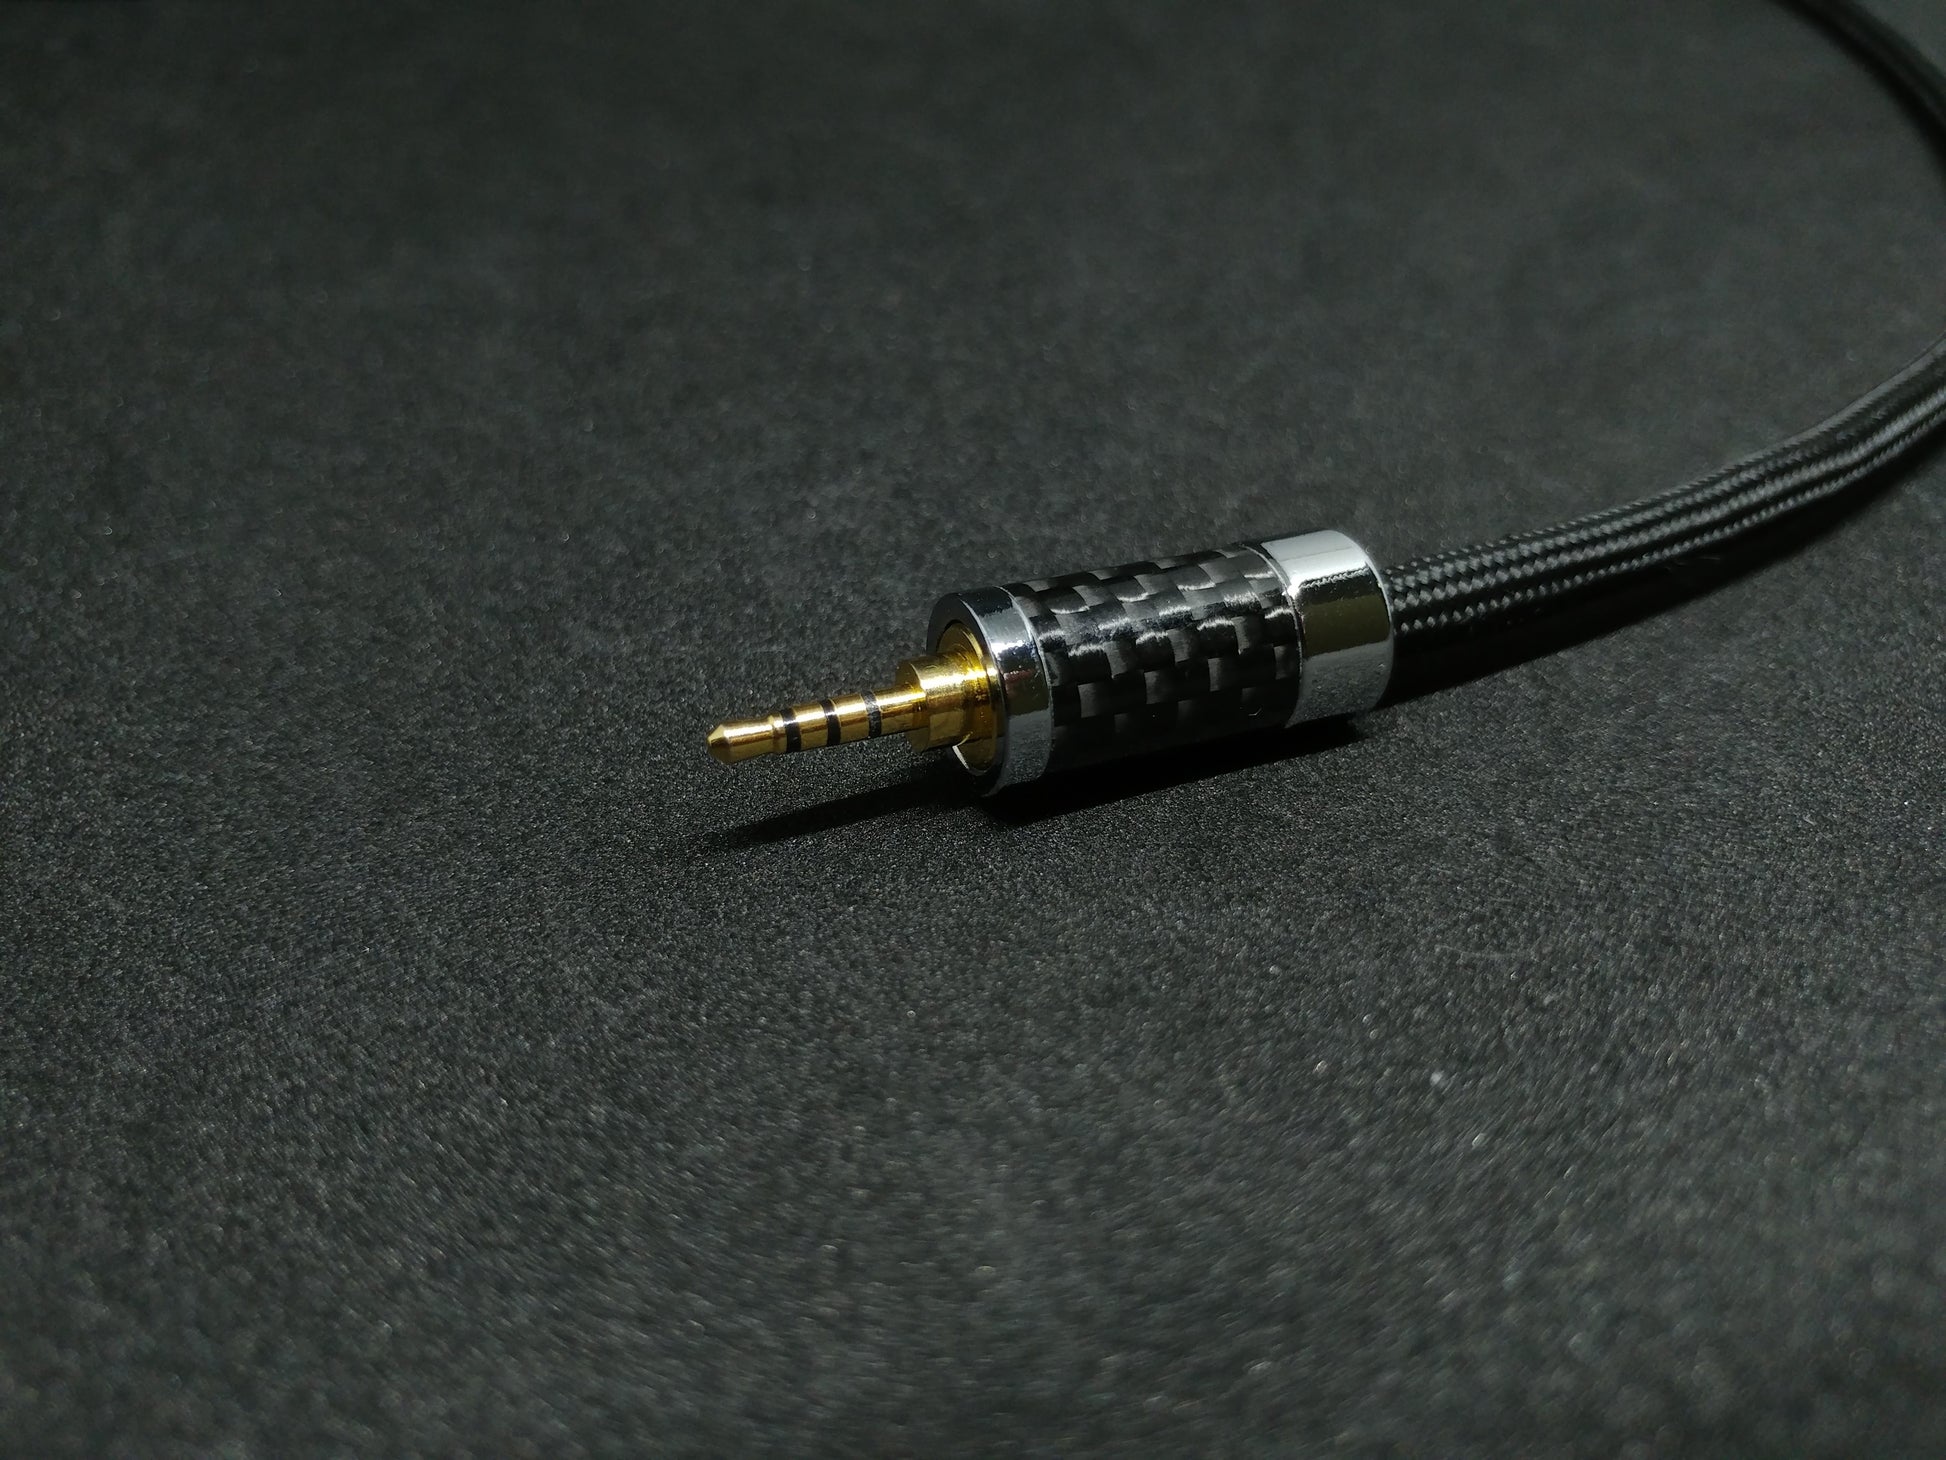 2.5mm TRRS gold plated connector.